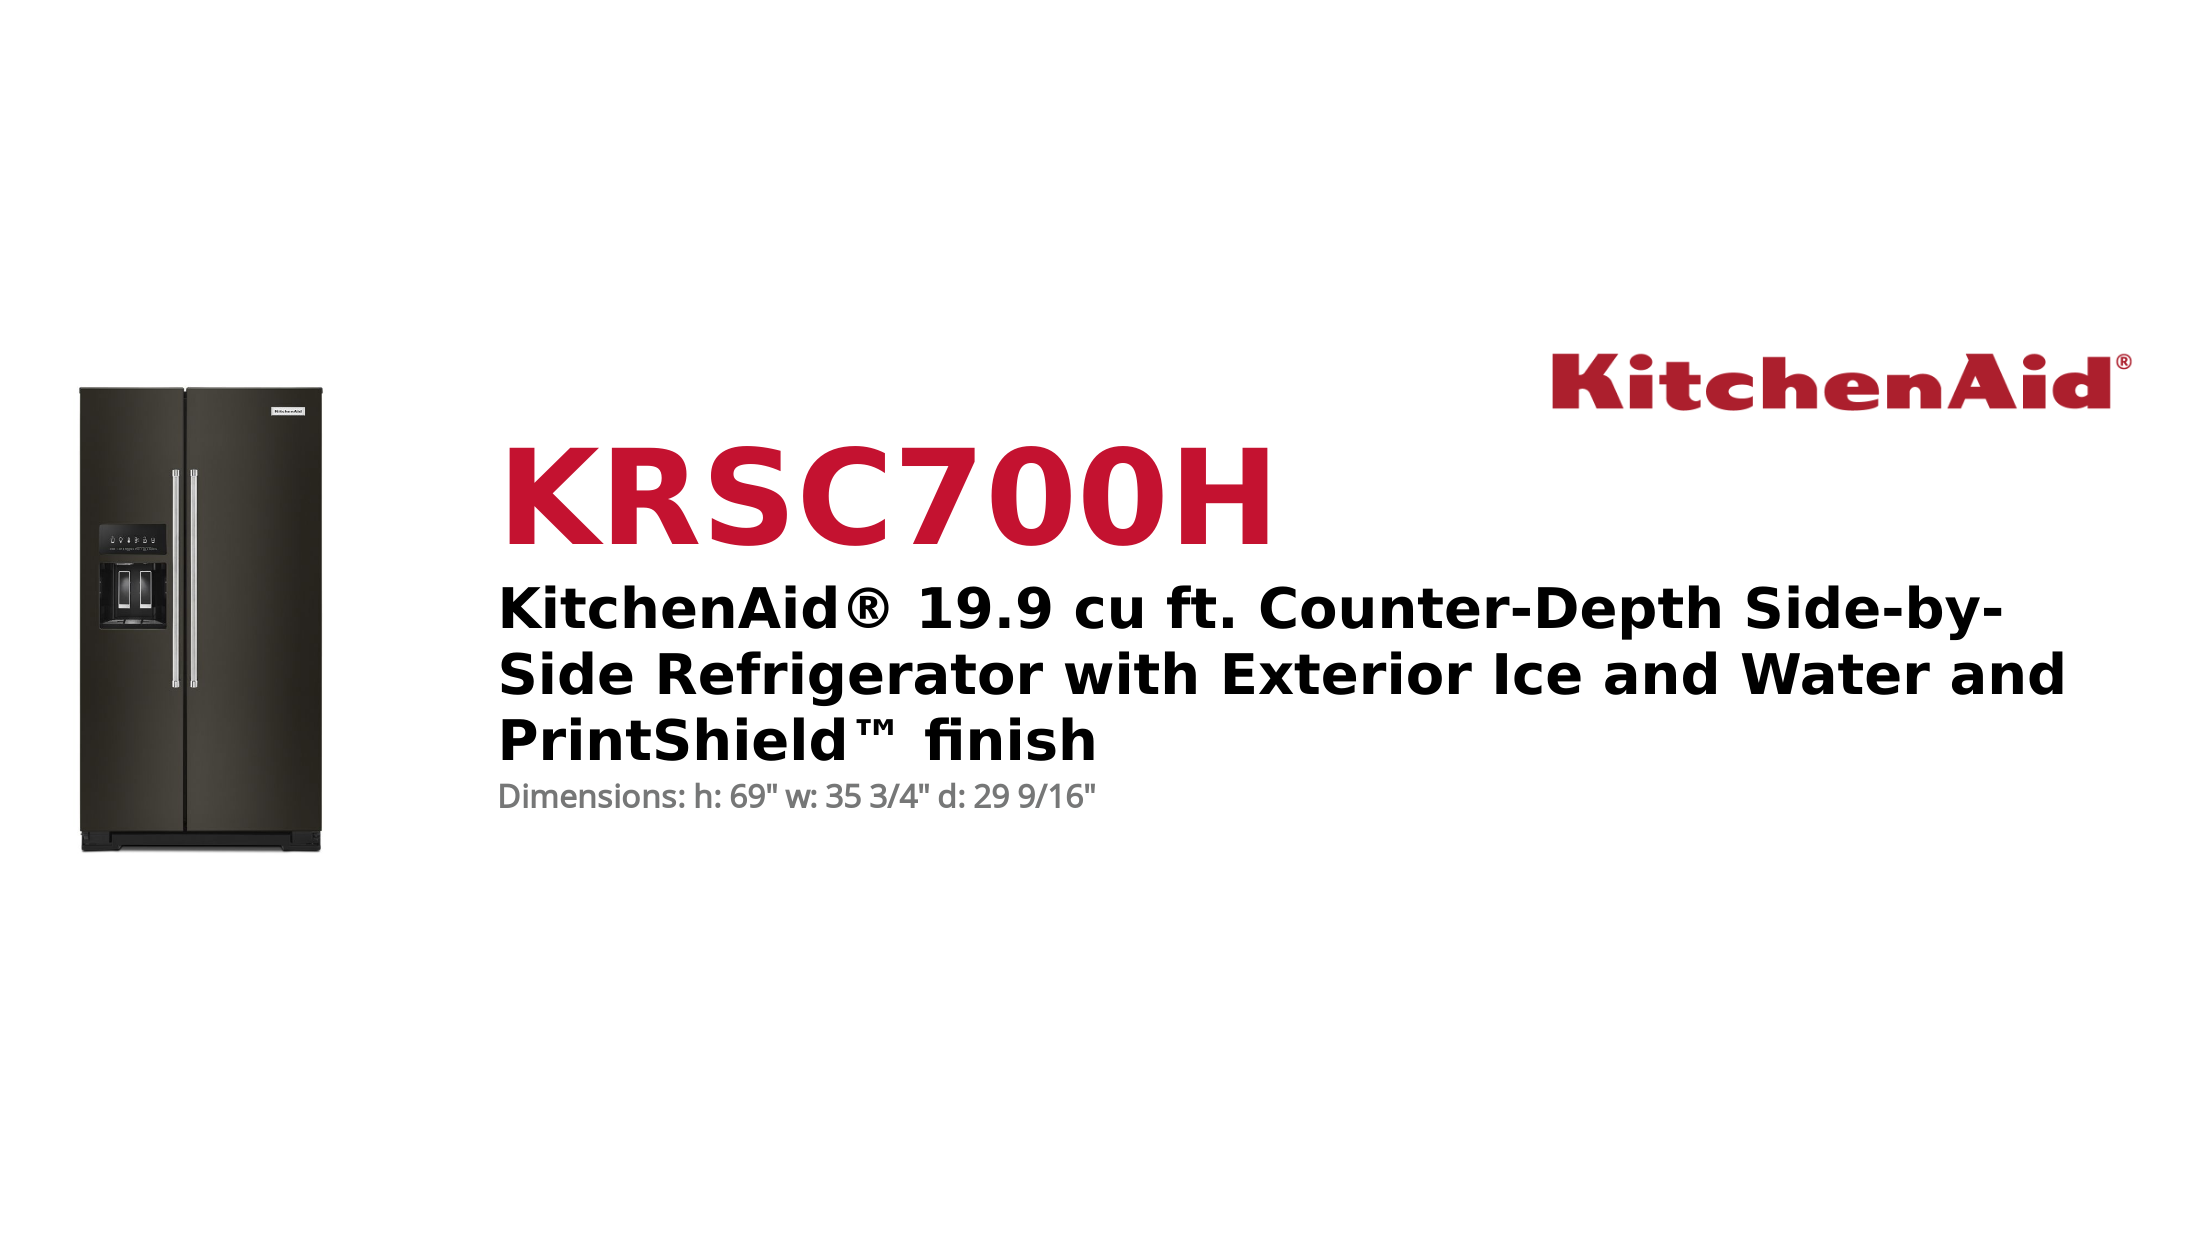 KitchenAid® 19.9 cu ft. Counter-Depth Side-by-Side Refrigerator with Exterior Ice and Water and PrintShield™ finish